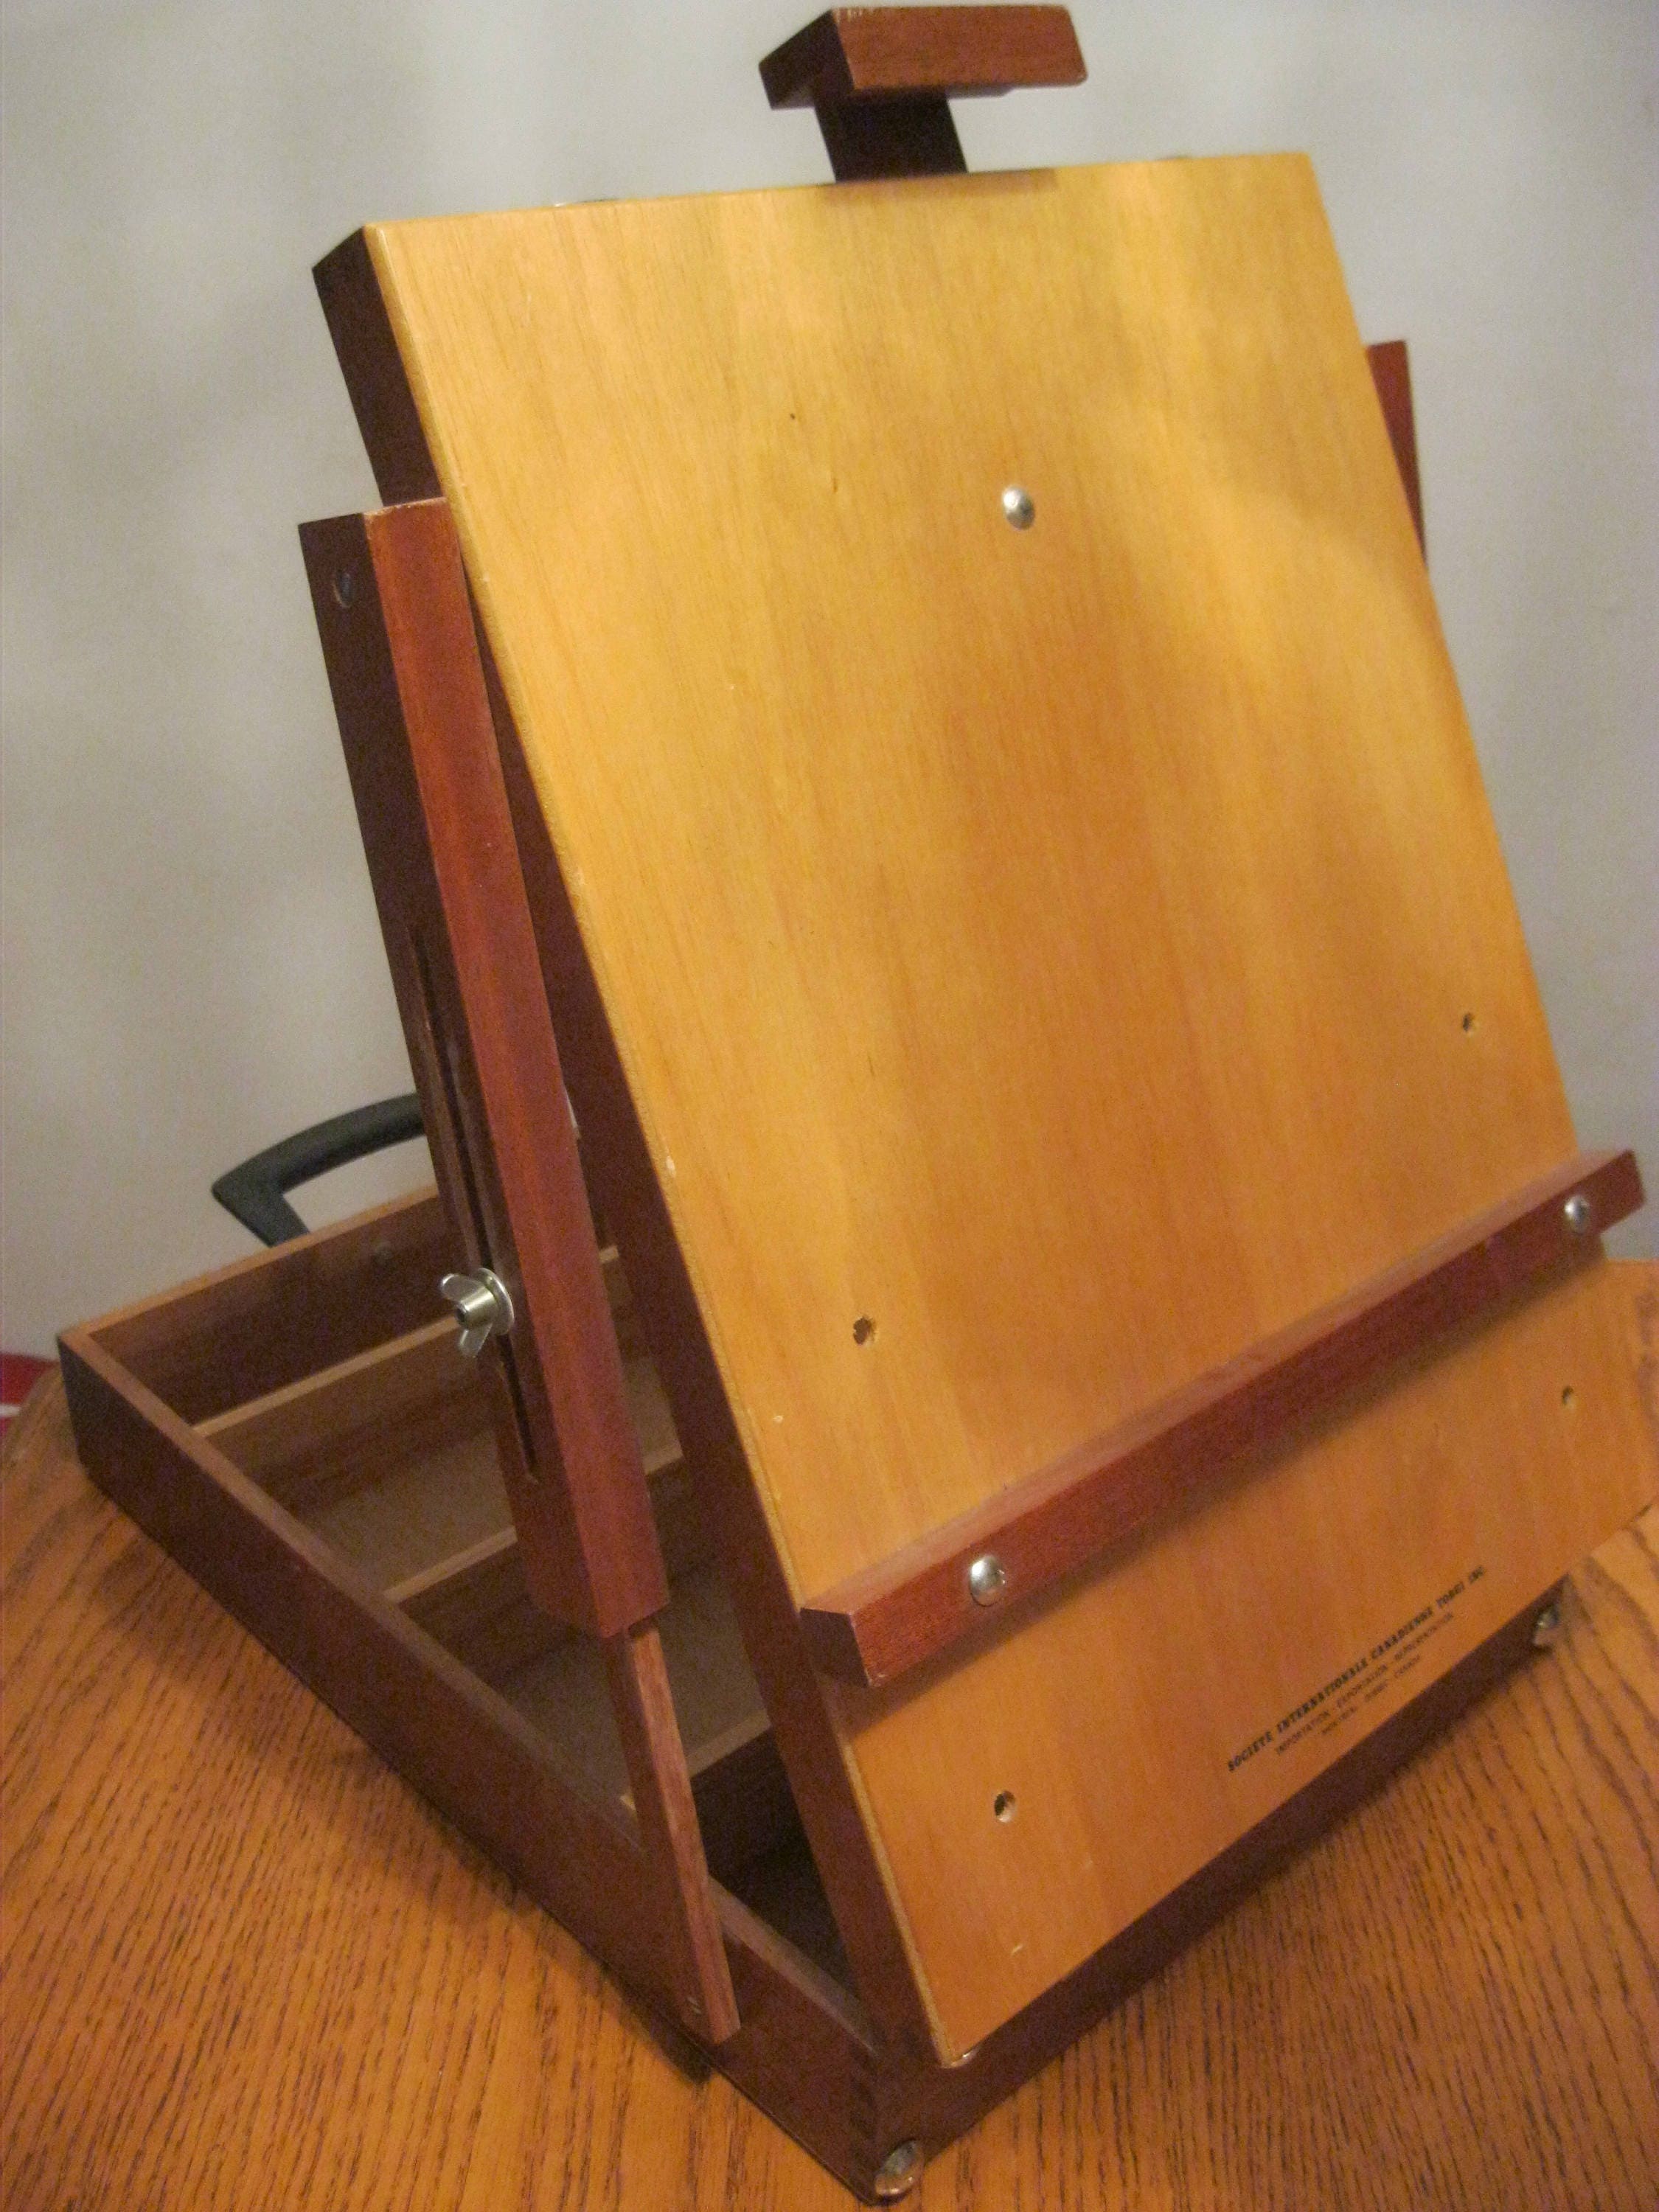 Portable-Easel-And-Lamps